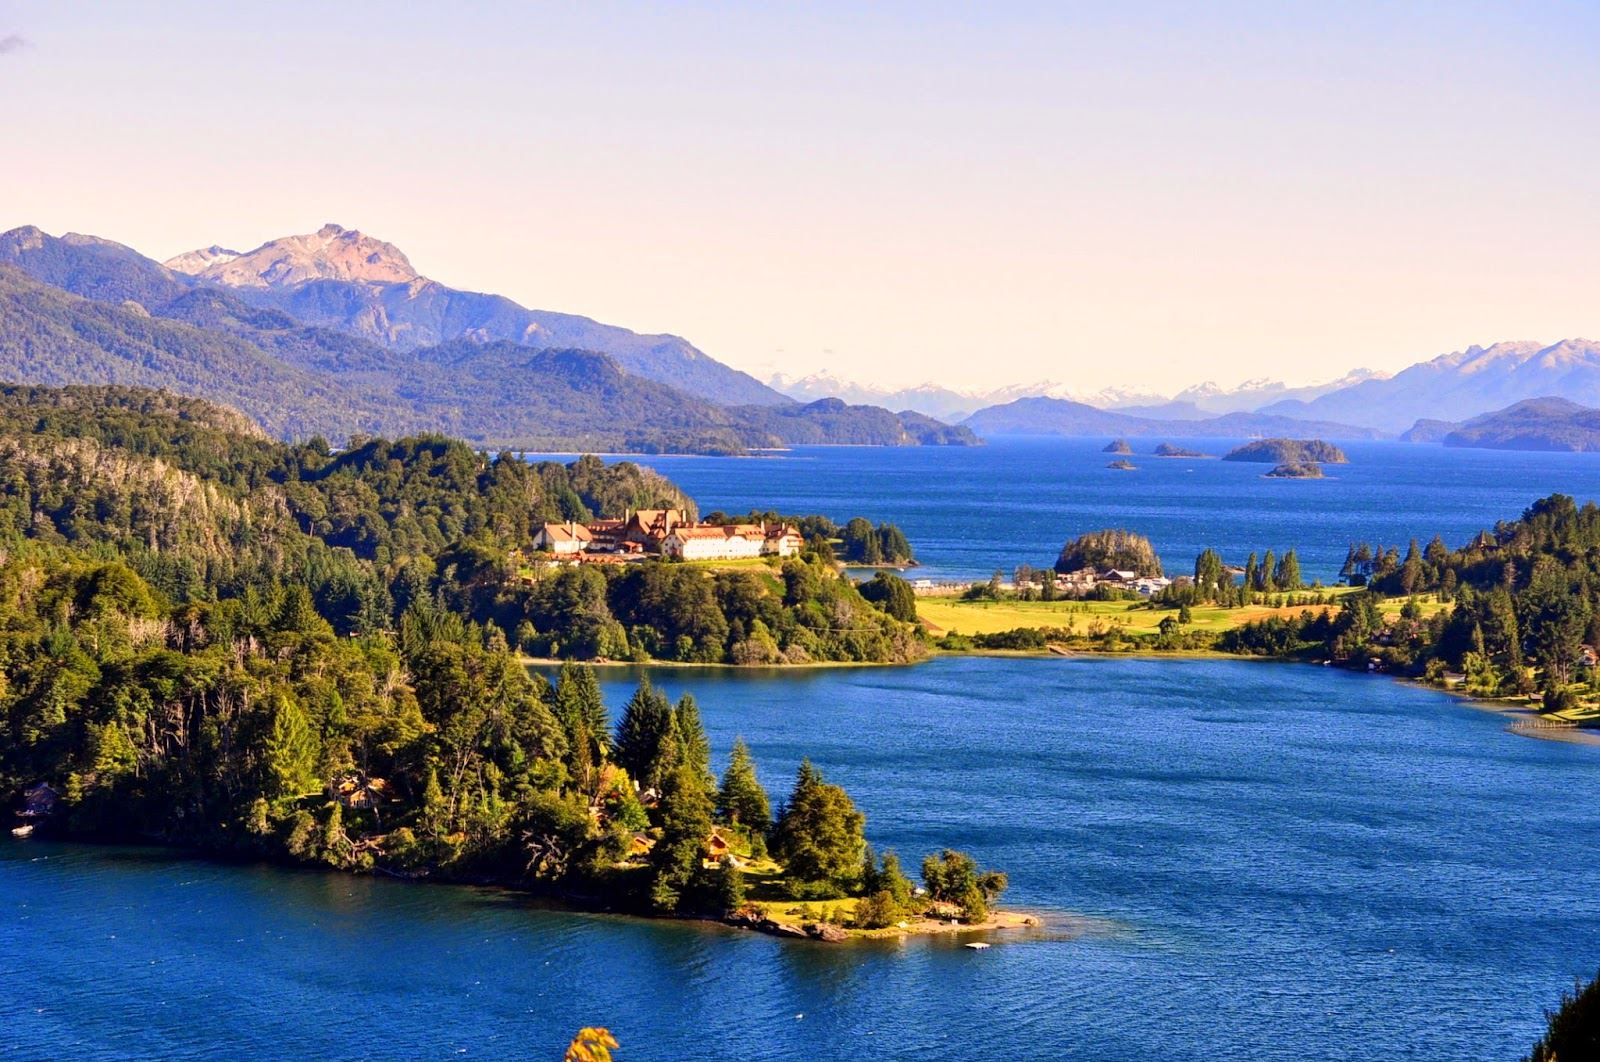 What to do in Bariloche